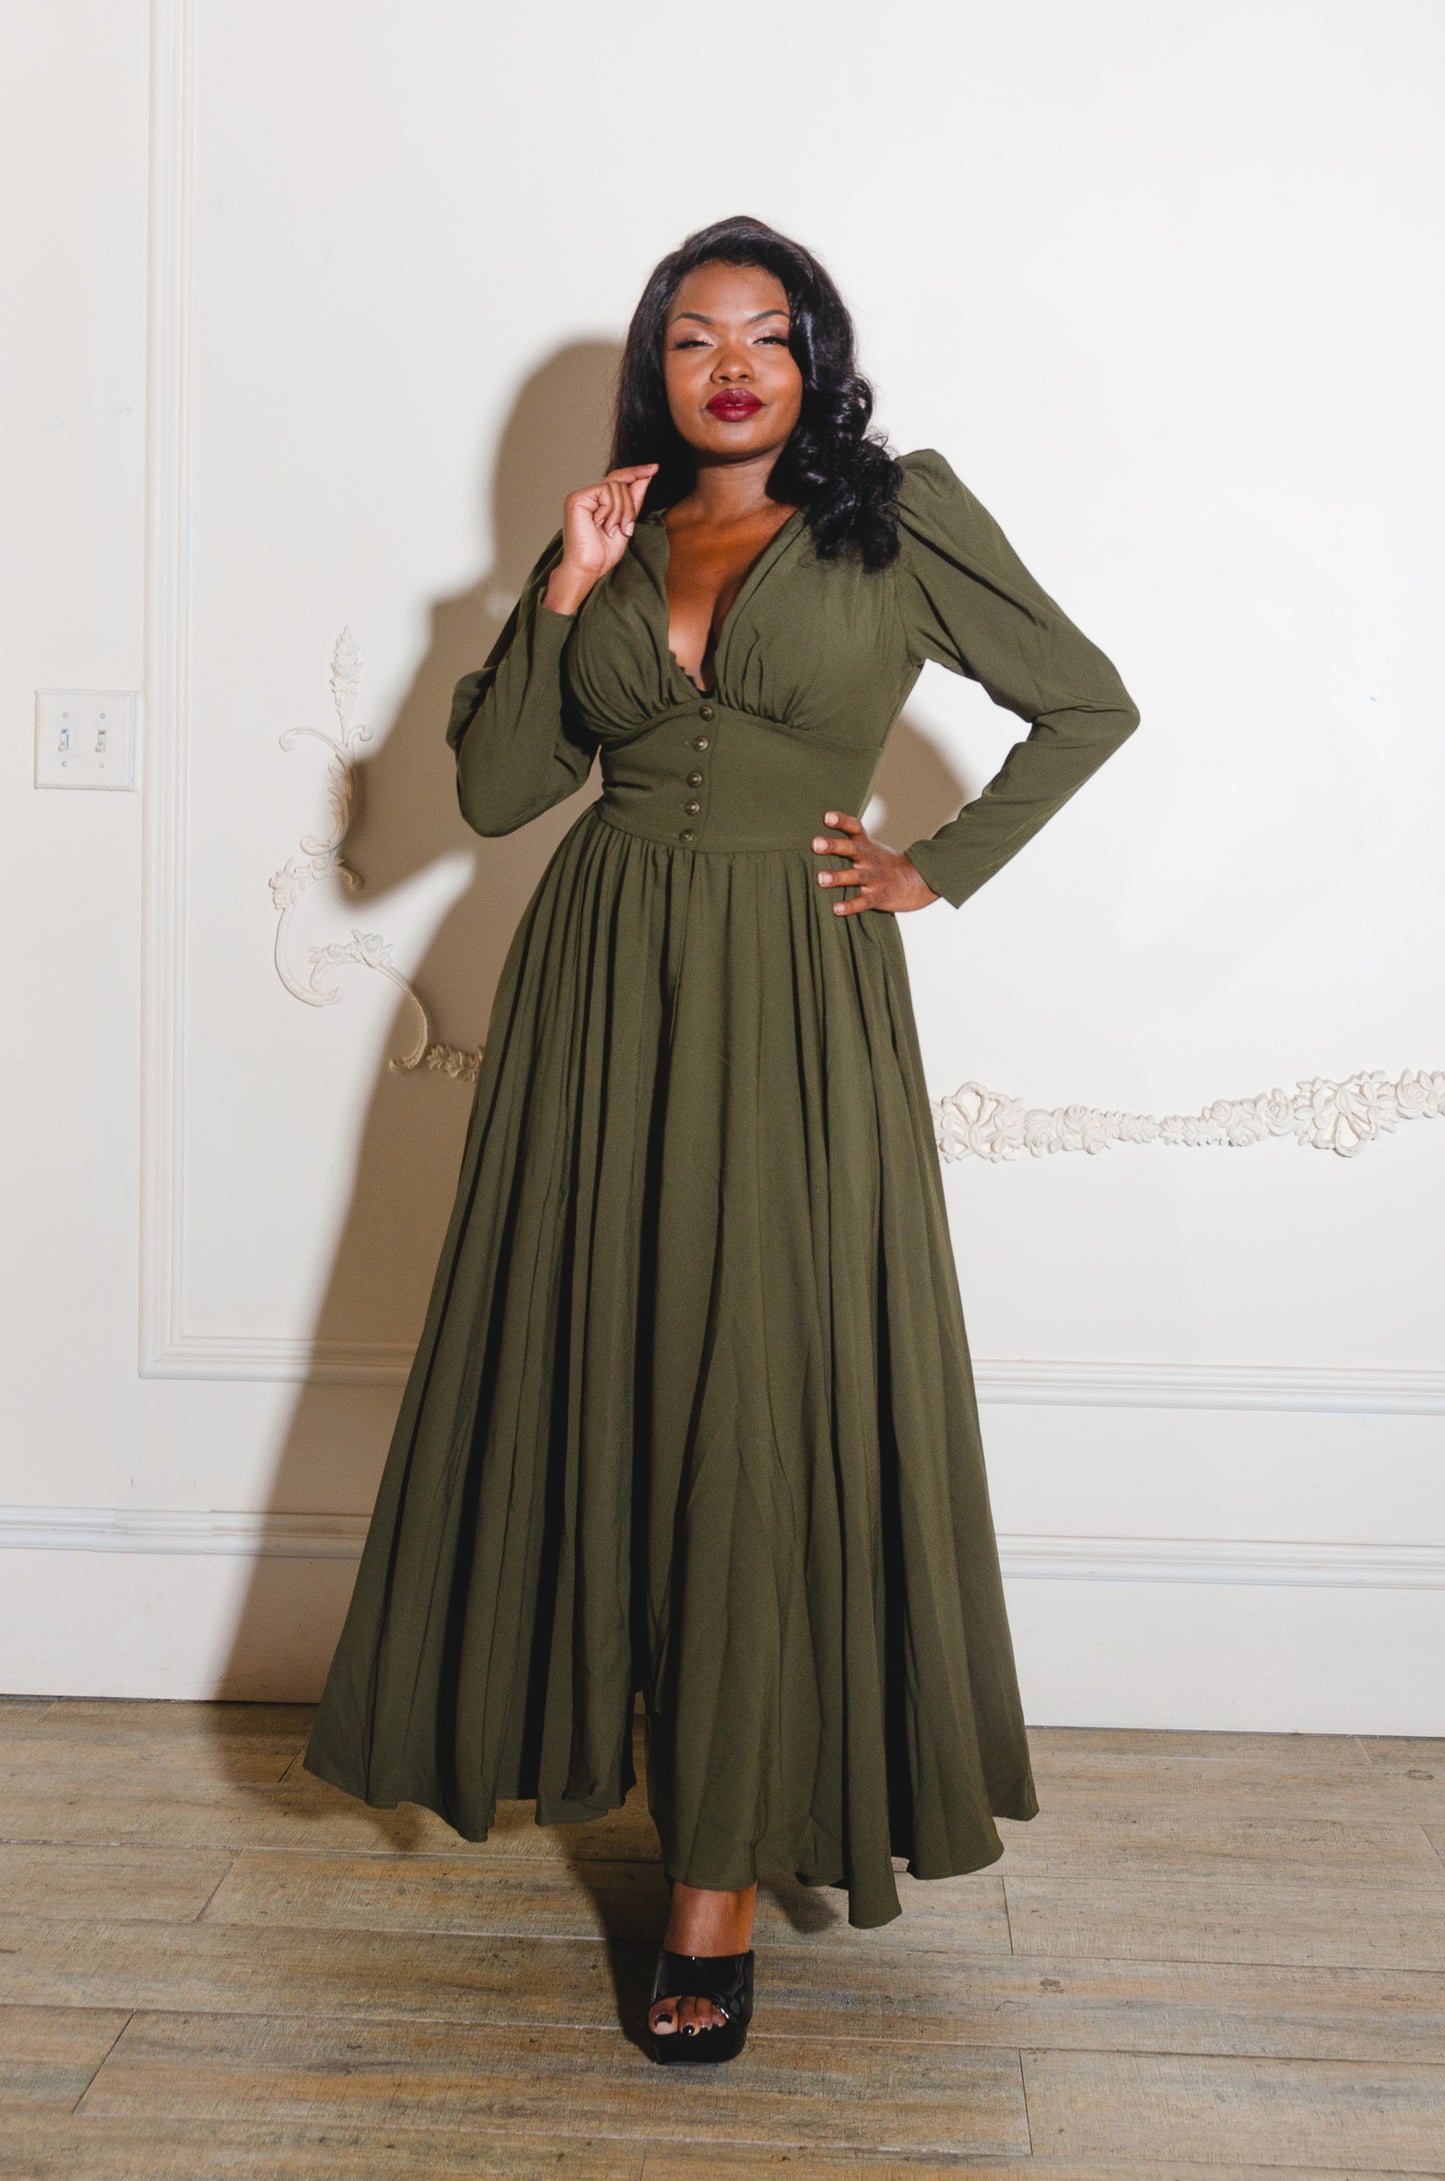 Clarice 40s Vintage Maxi Coat Dress in Olive Green Poly Crepe | Laura Byrnes Design